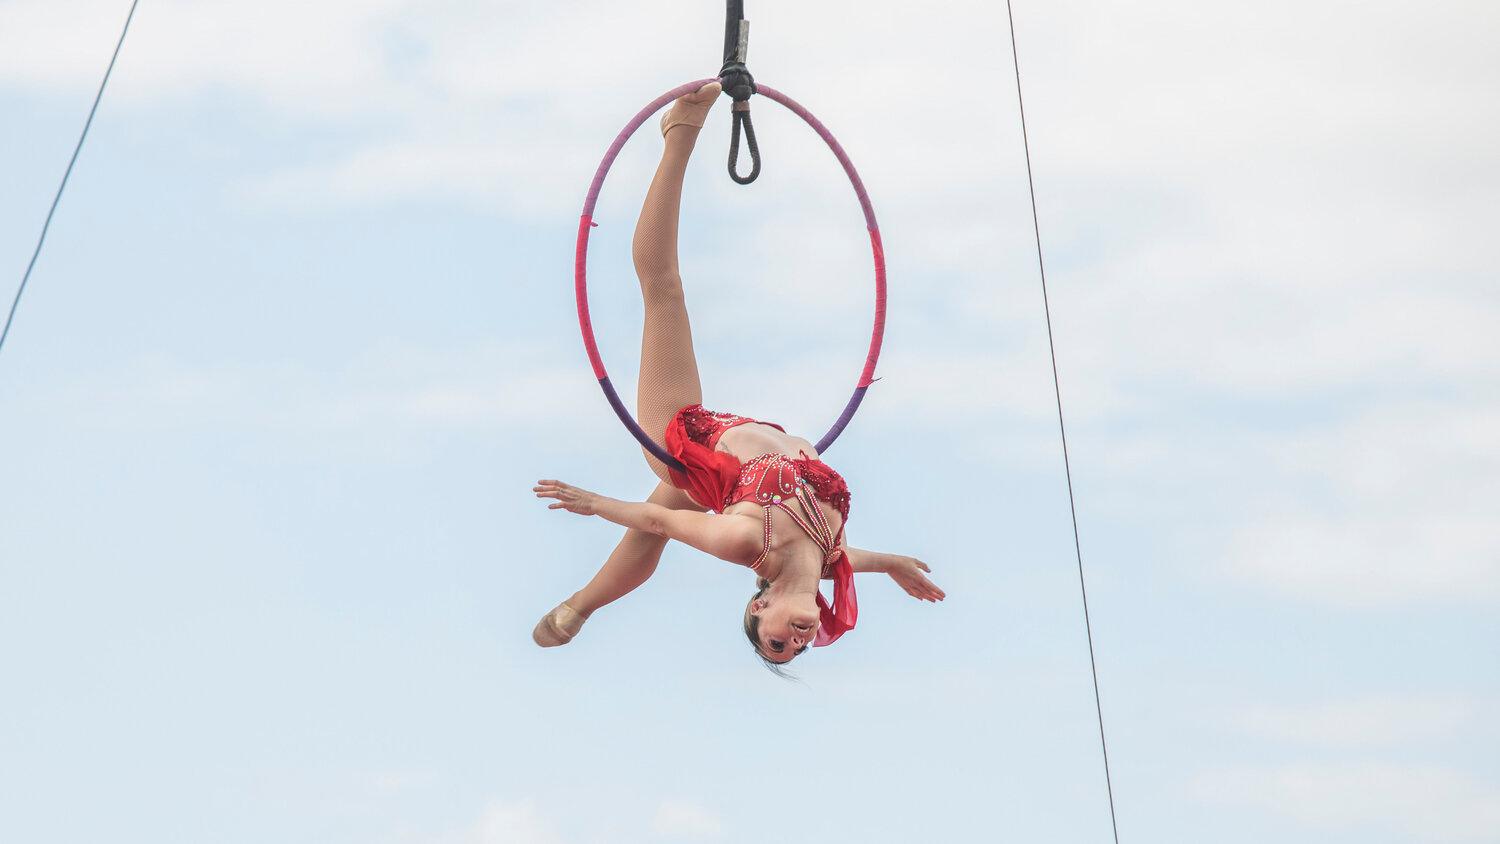 An acrobat hangs from a ring at the Southwest Washington Fairgrounds during the Jordan World Circus show on Wednesday, May 31.